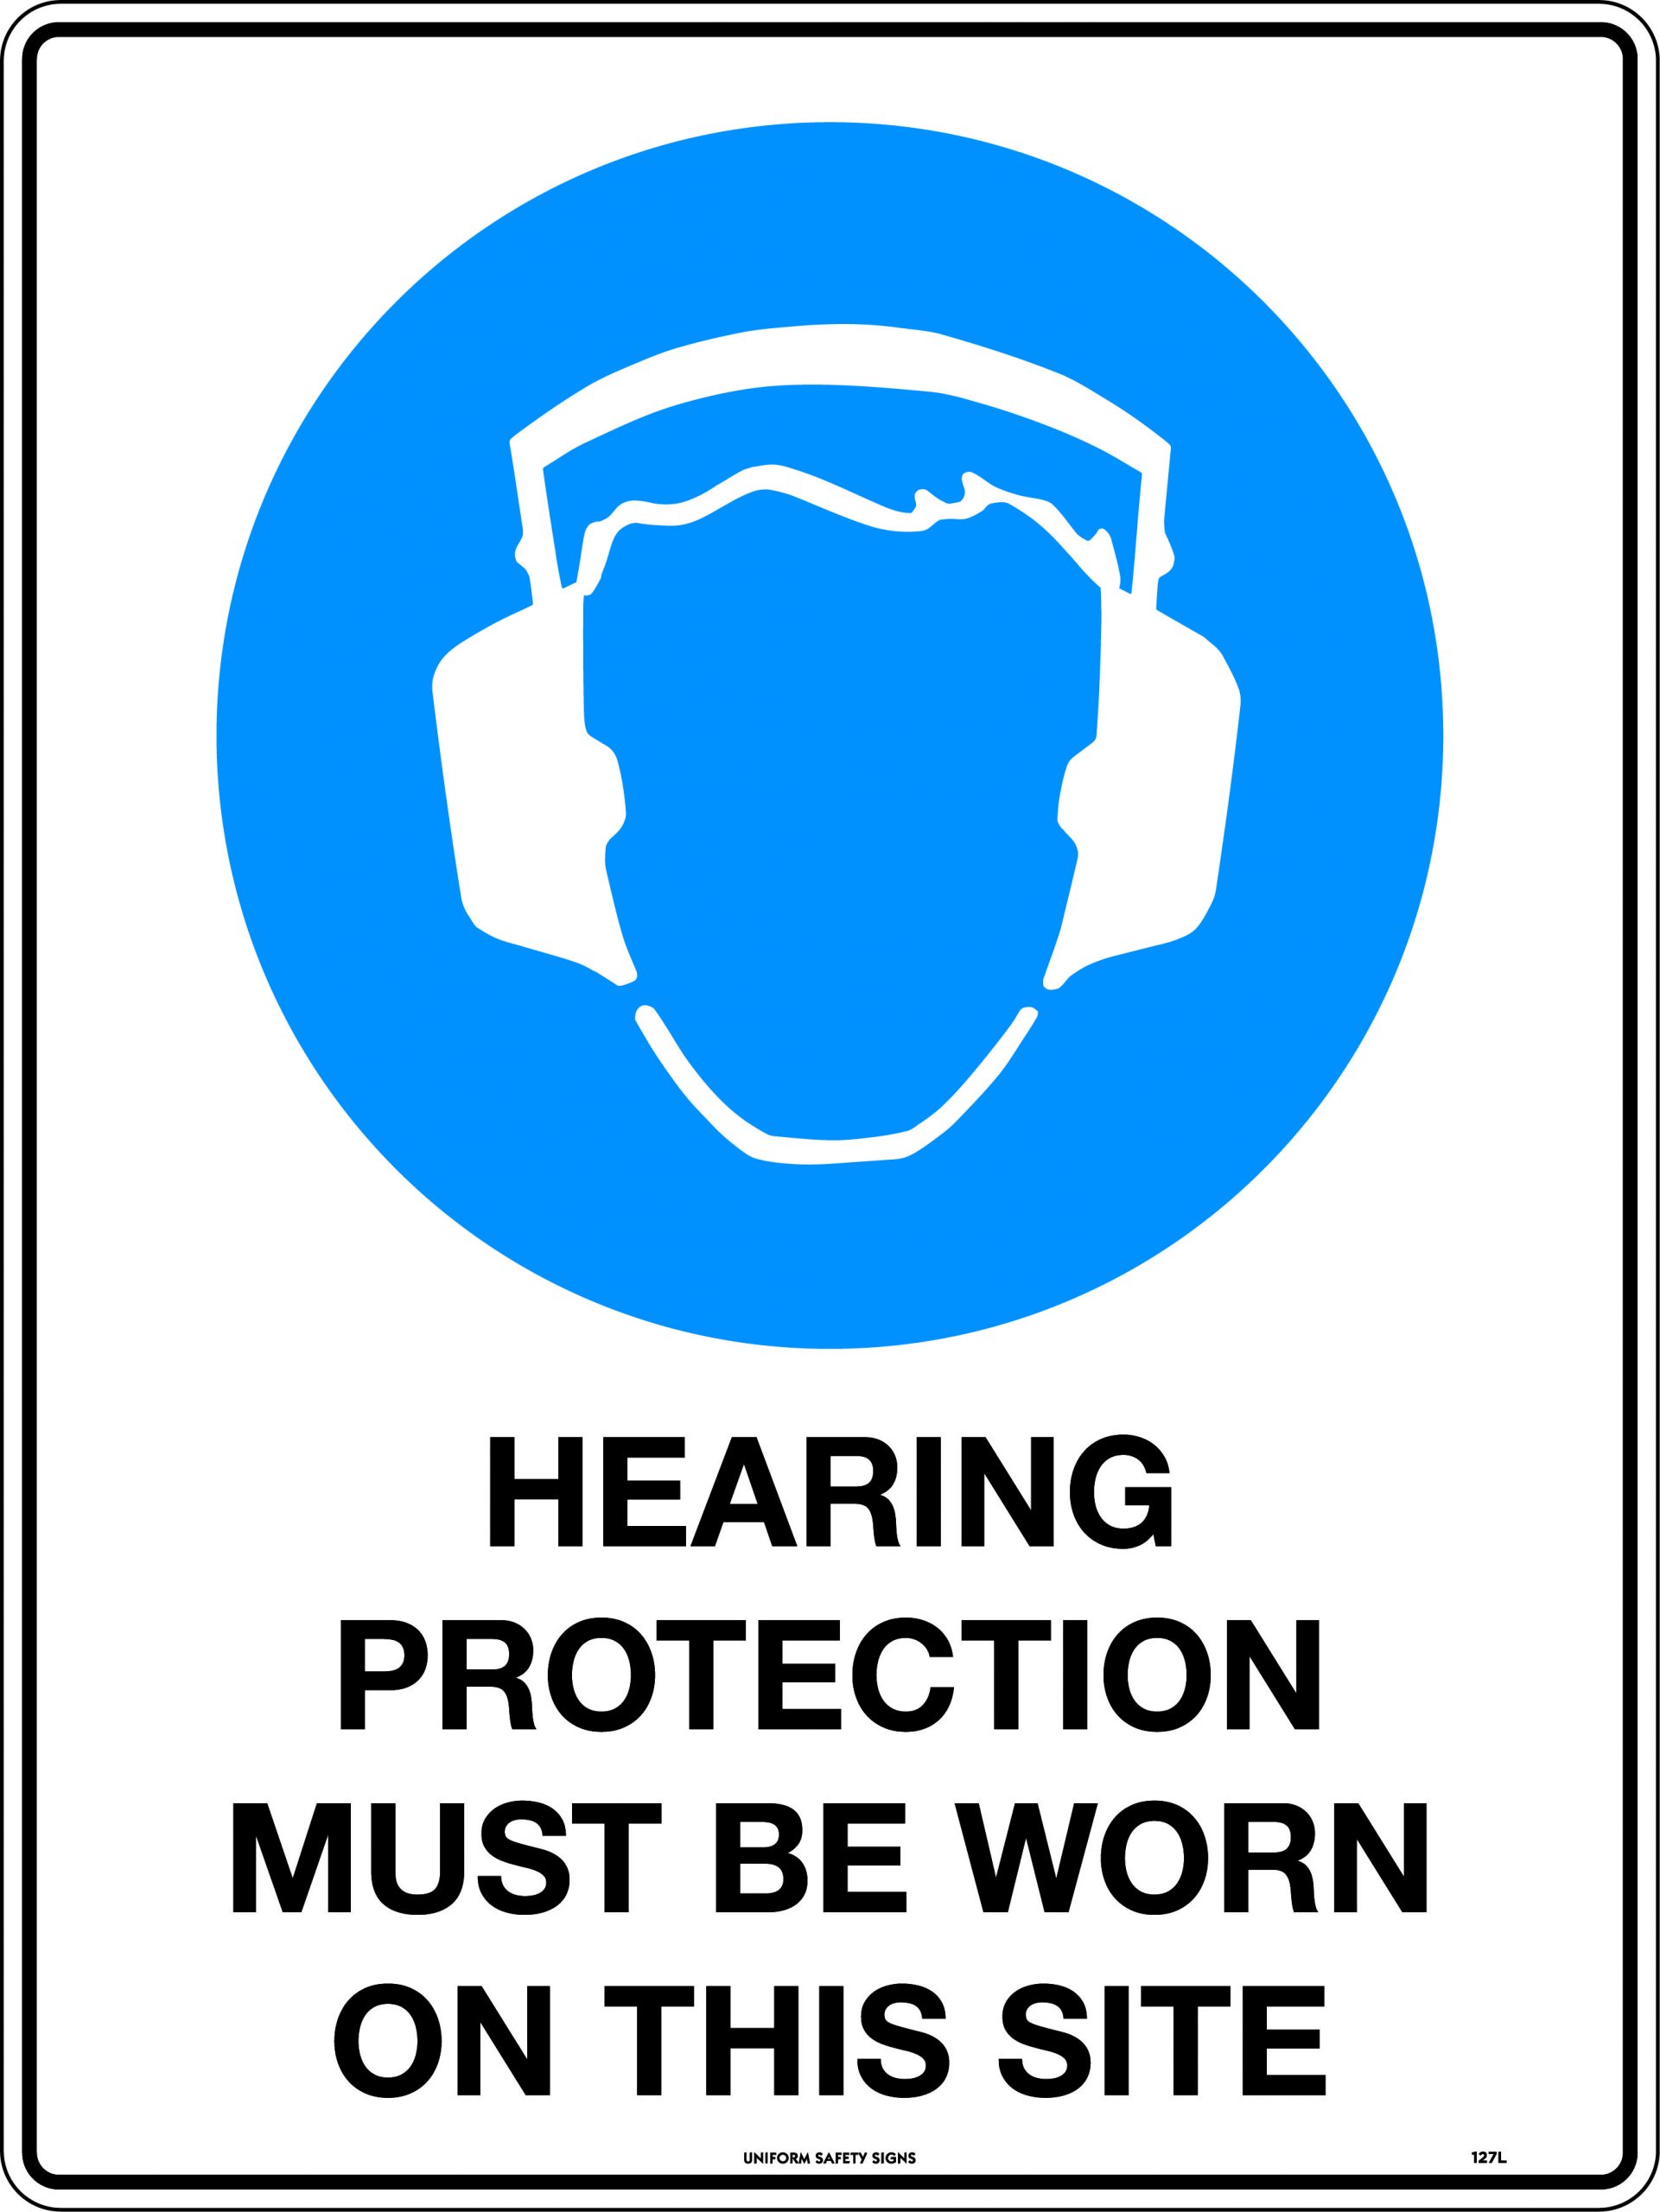 SIGN 130 X 95MM SELF ADHESIVE HEARING PROTECTION MUST BE WORN ON THIS SITE